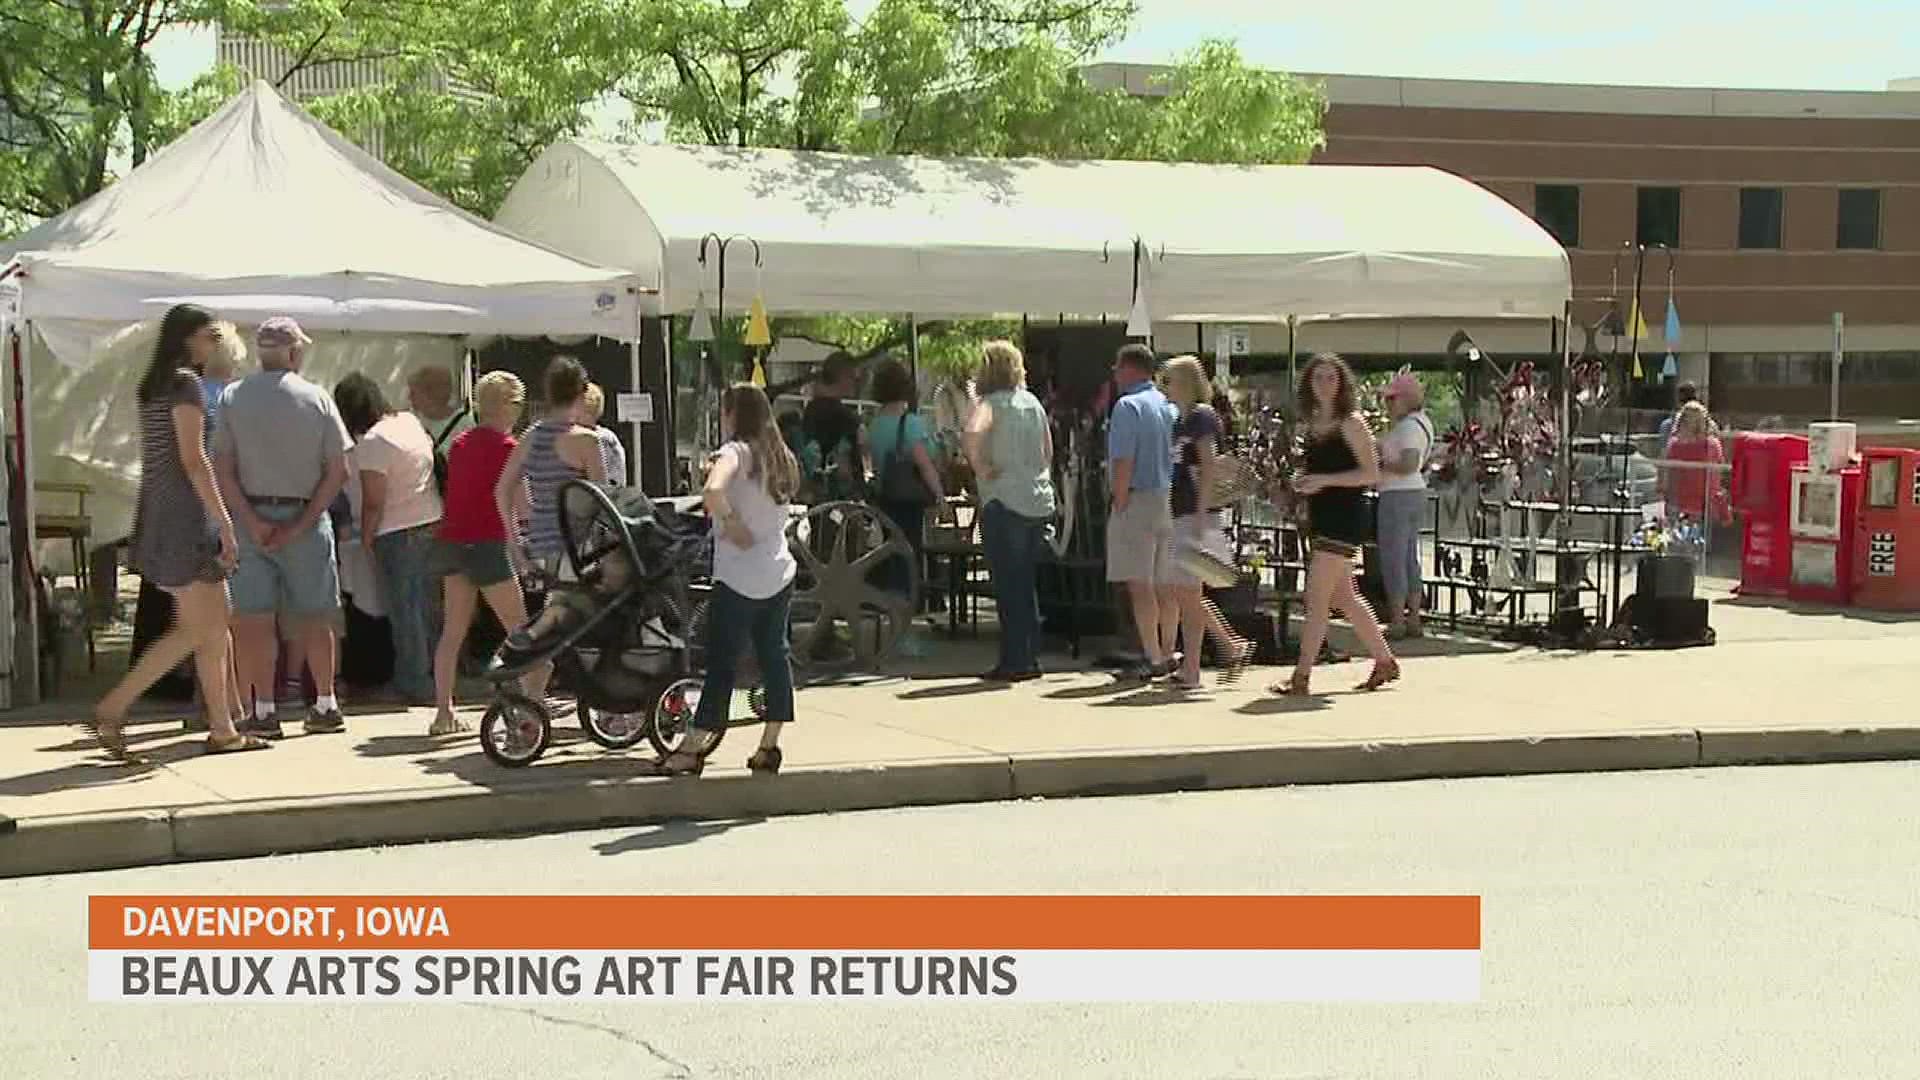 The art fair, a Mother's Day tradition, will take place May 7-8 at the Mississippi Valley Fairgrounds.